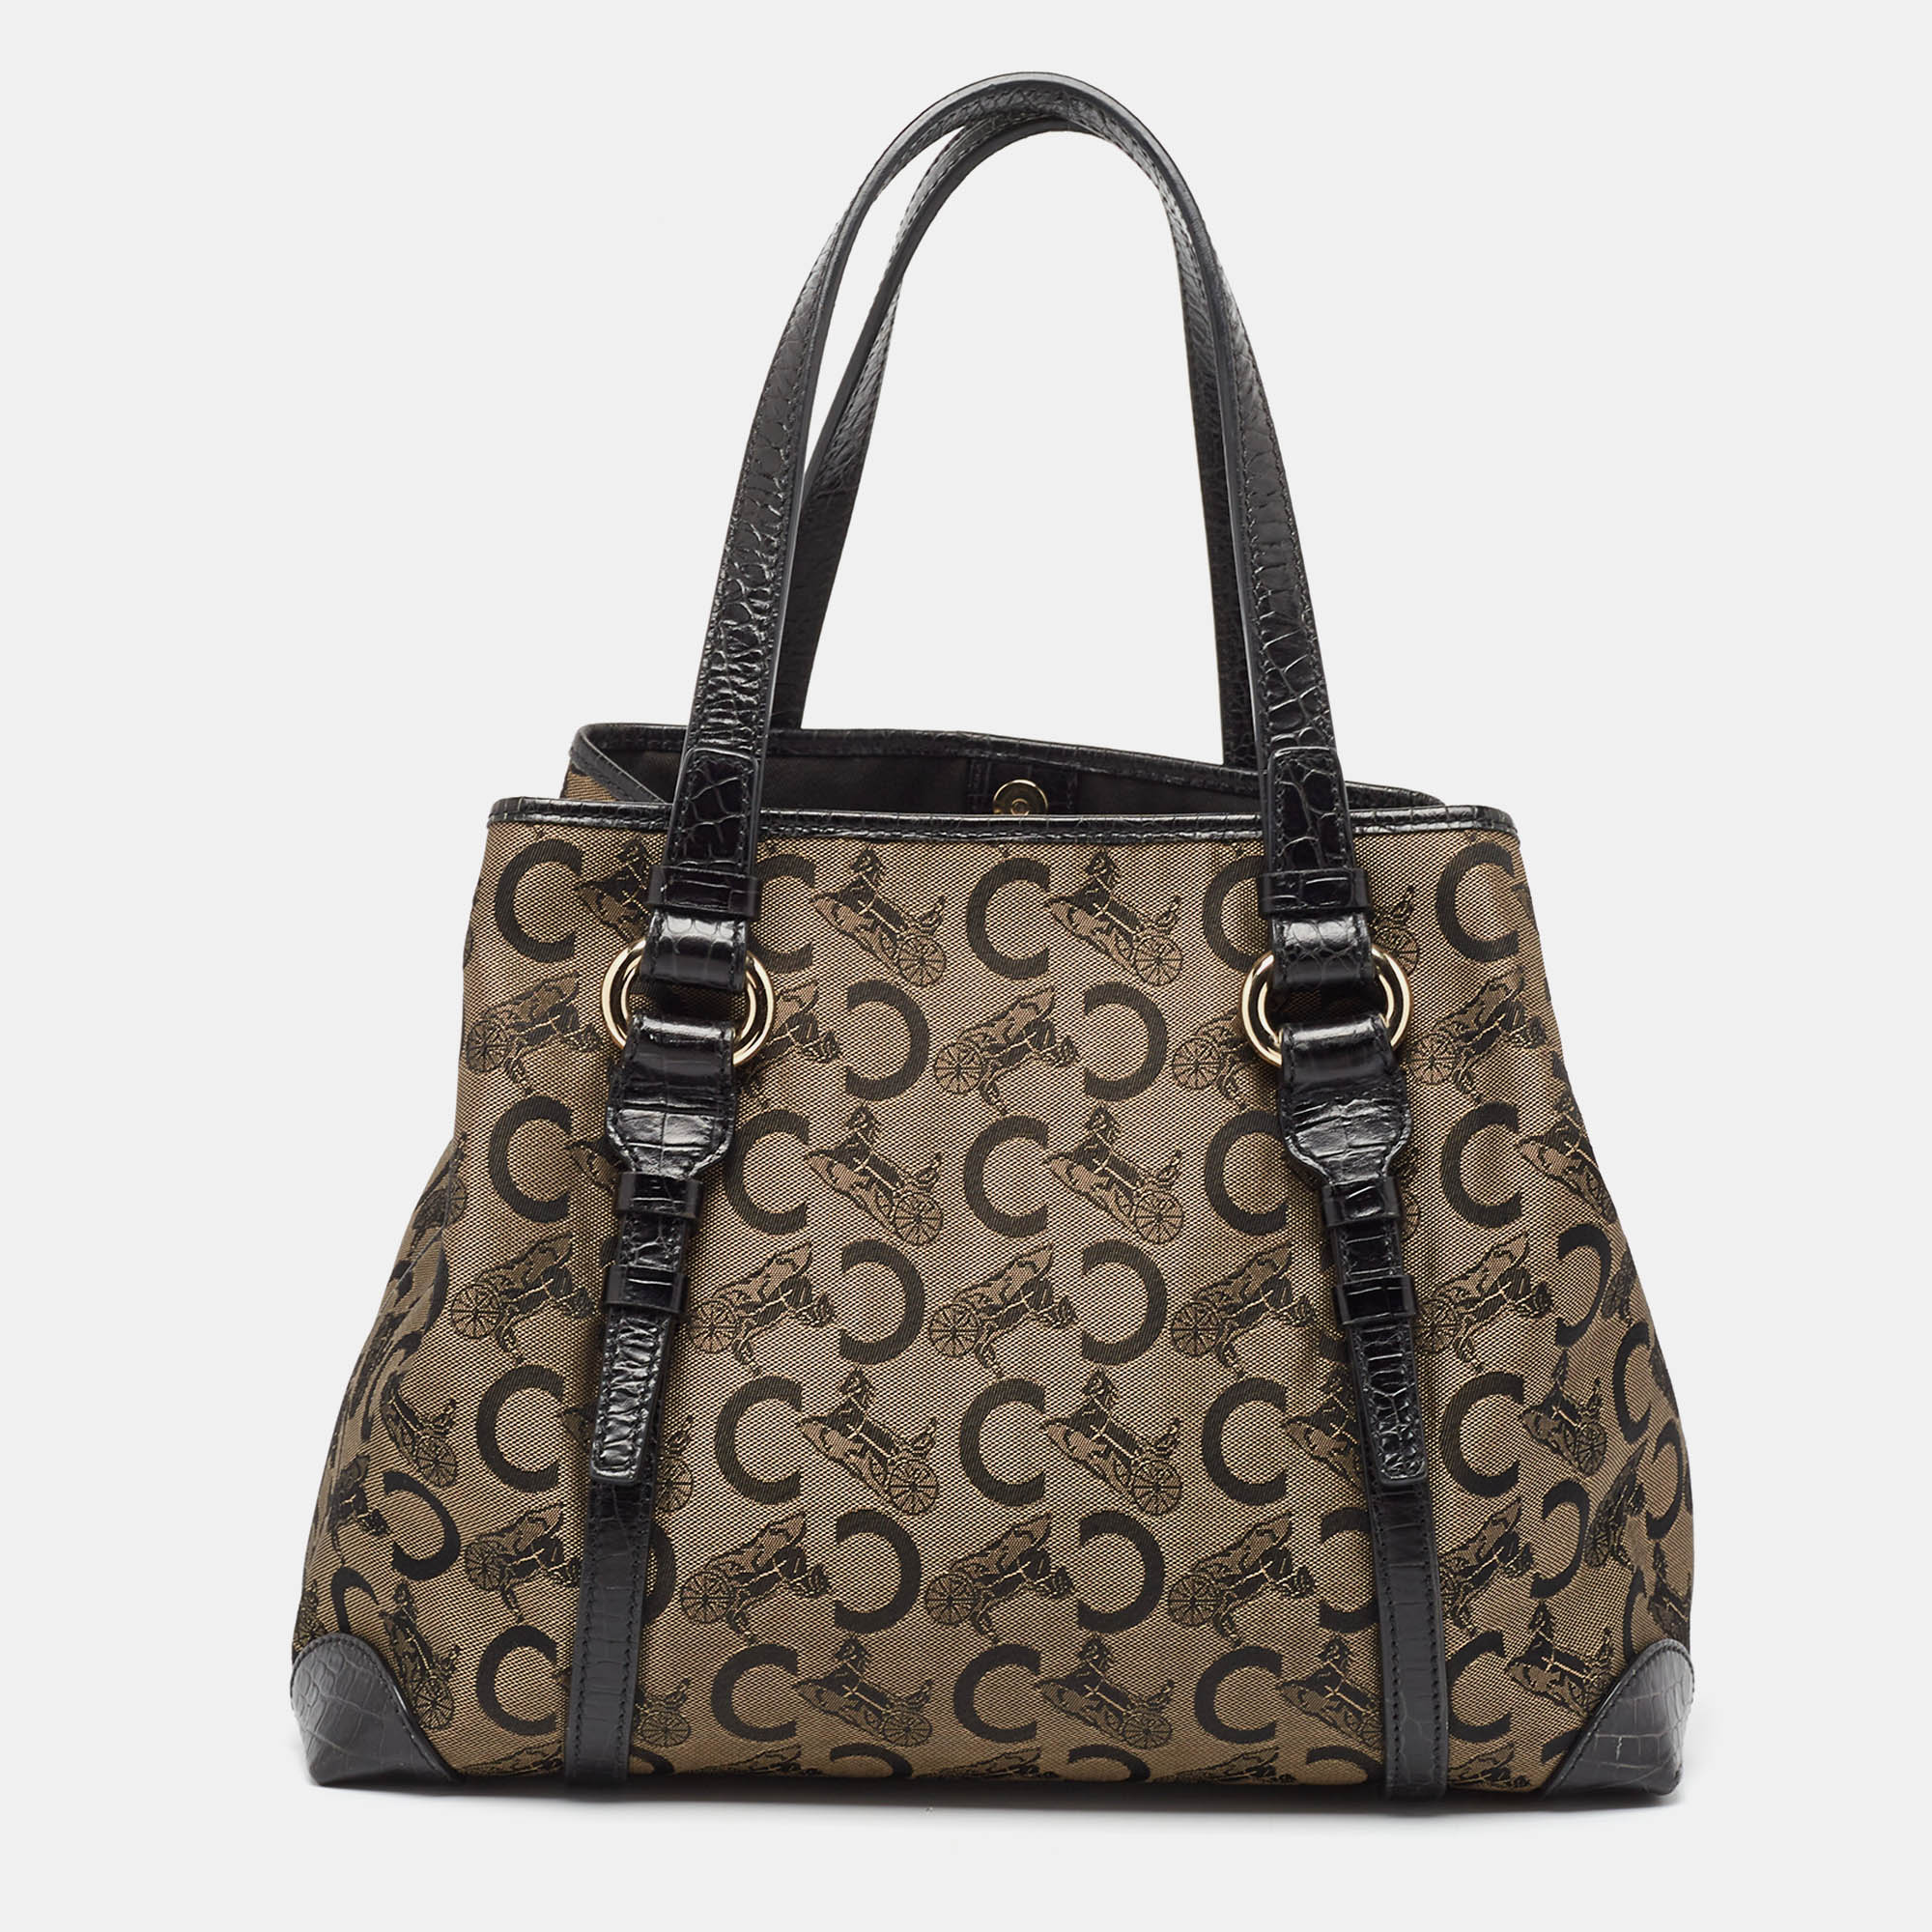 

Celine Black/Brown Macadam Fabric and Croc Embossed Leather Tote